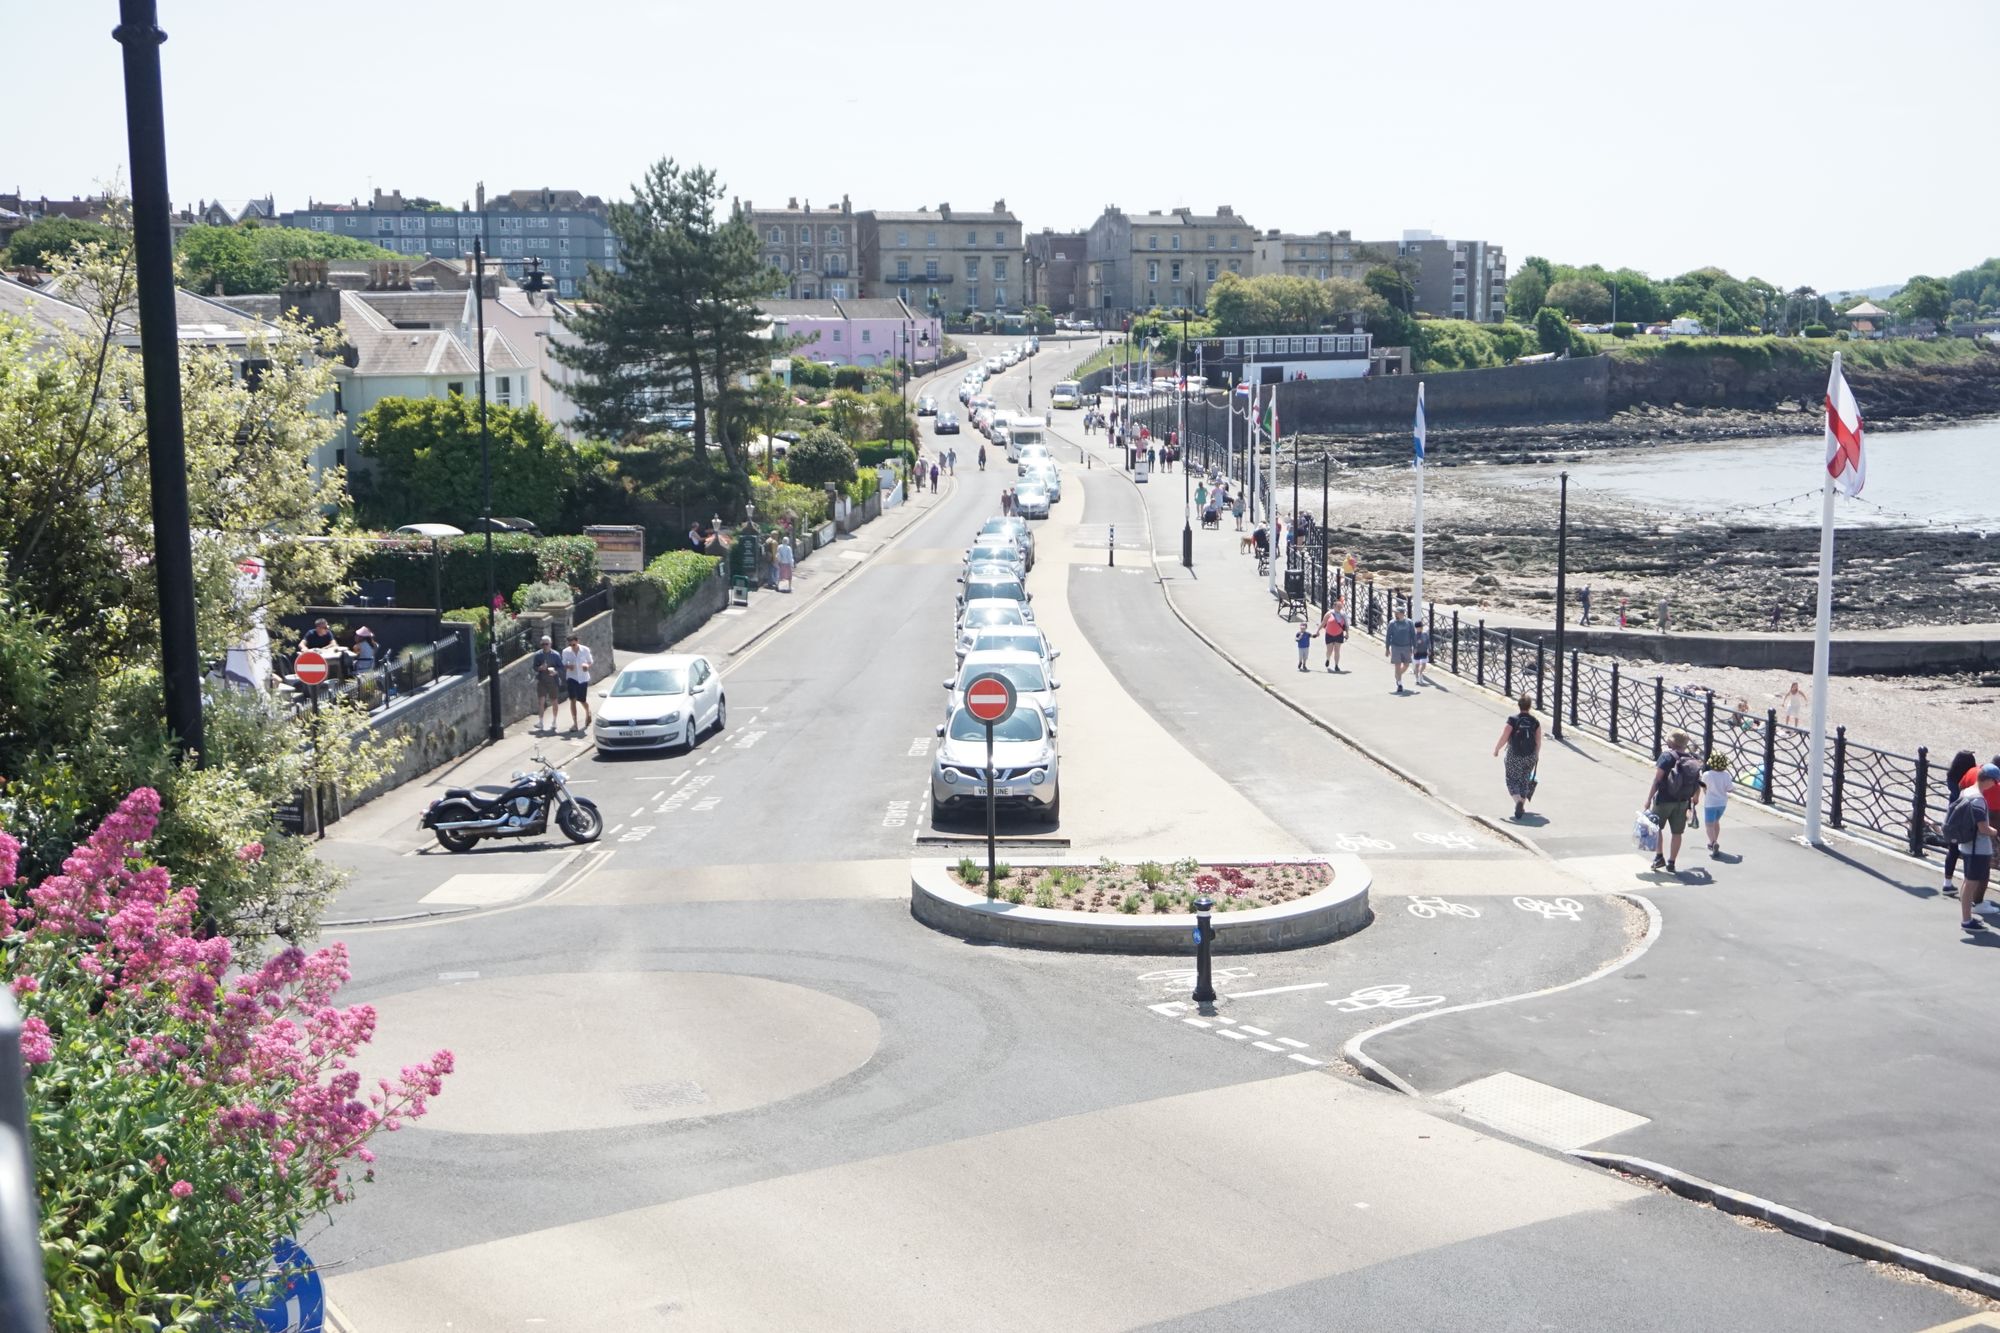 A buff-coloured circular 'roundabout' with a one-way road, a two-way cycle track with buff crossings, and a seaside with a shingle beach off to the right.